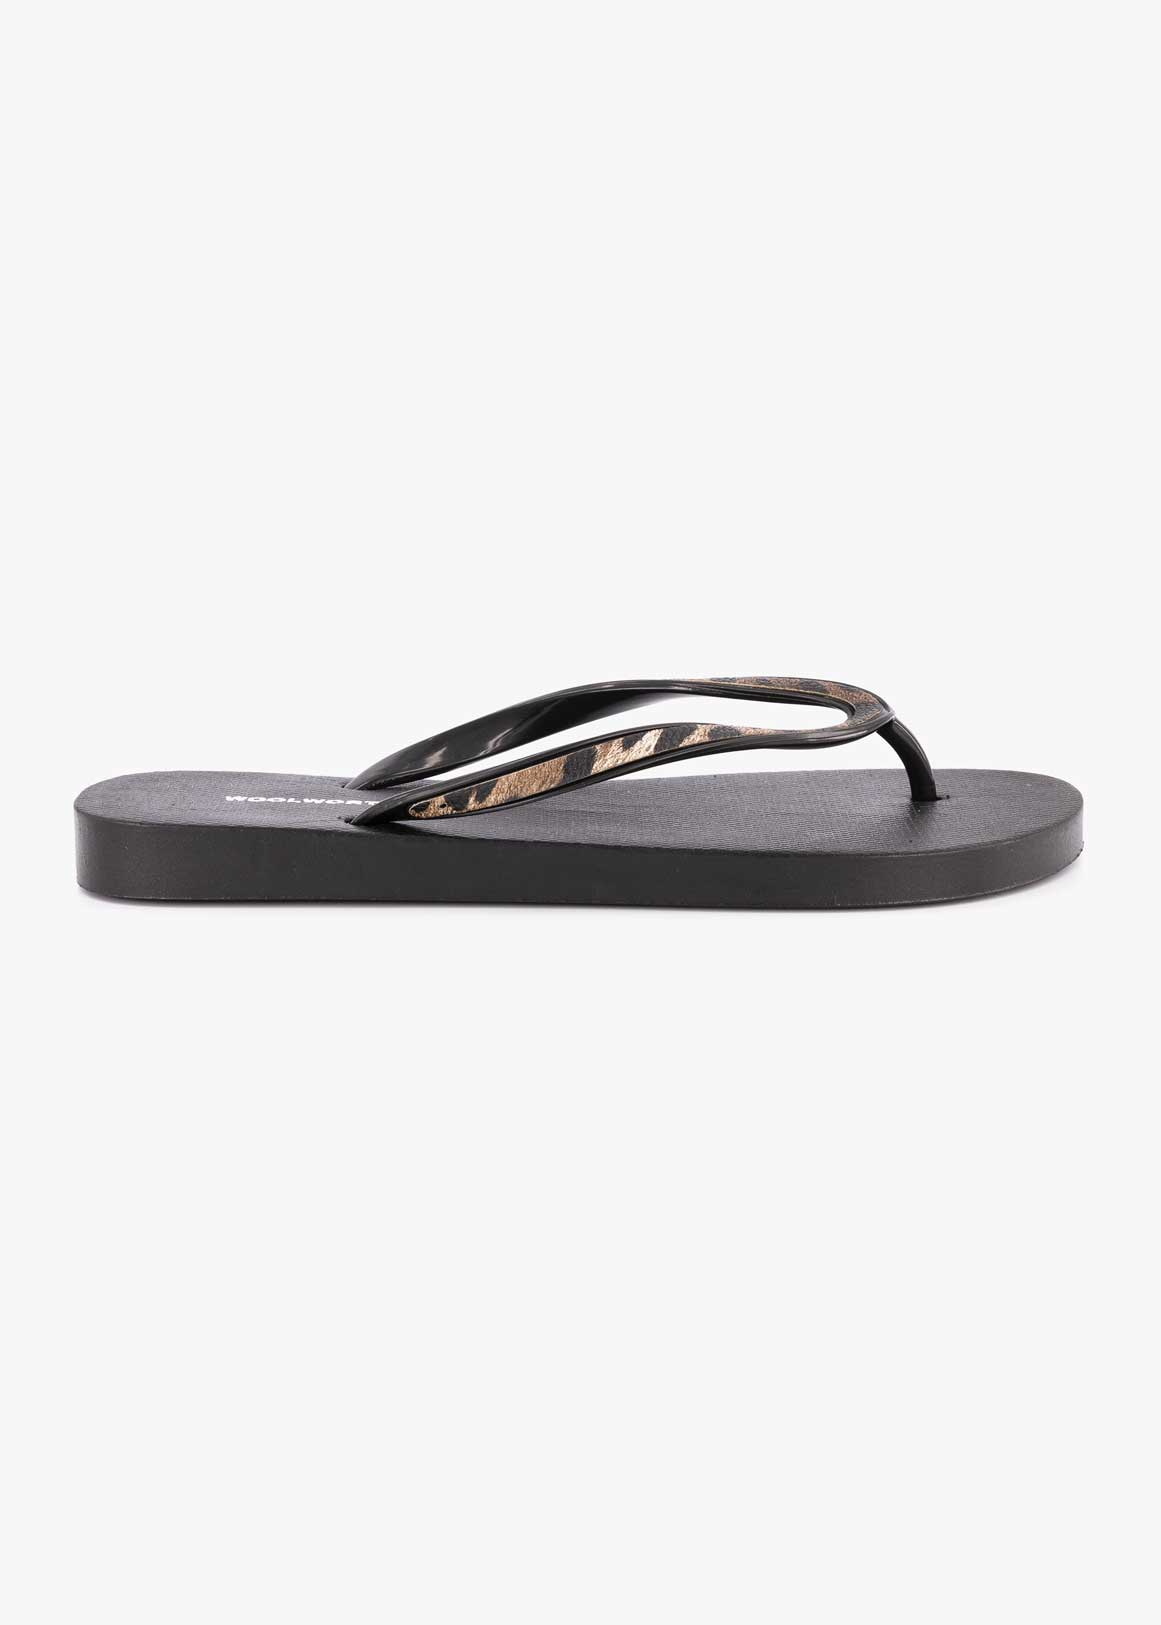 SS21 FLIP FLOP PRINT - Woolworths Mauritius Online